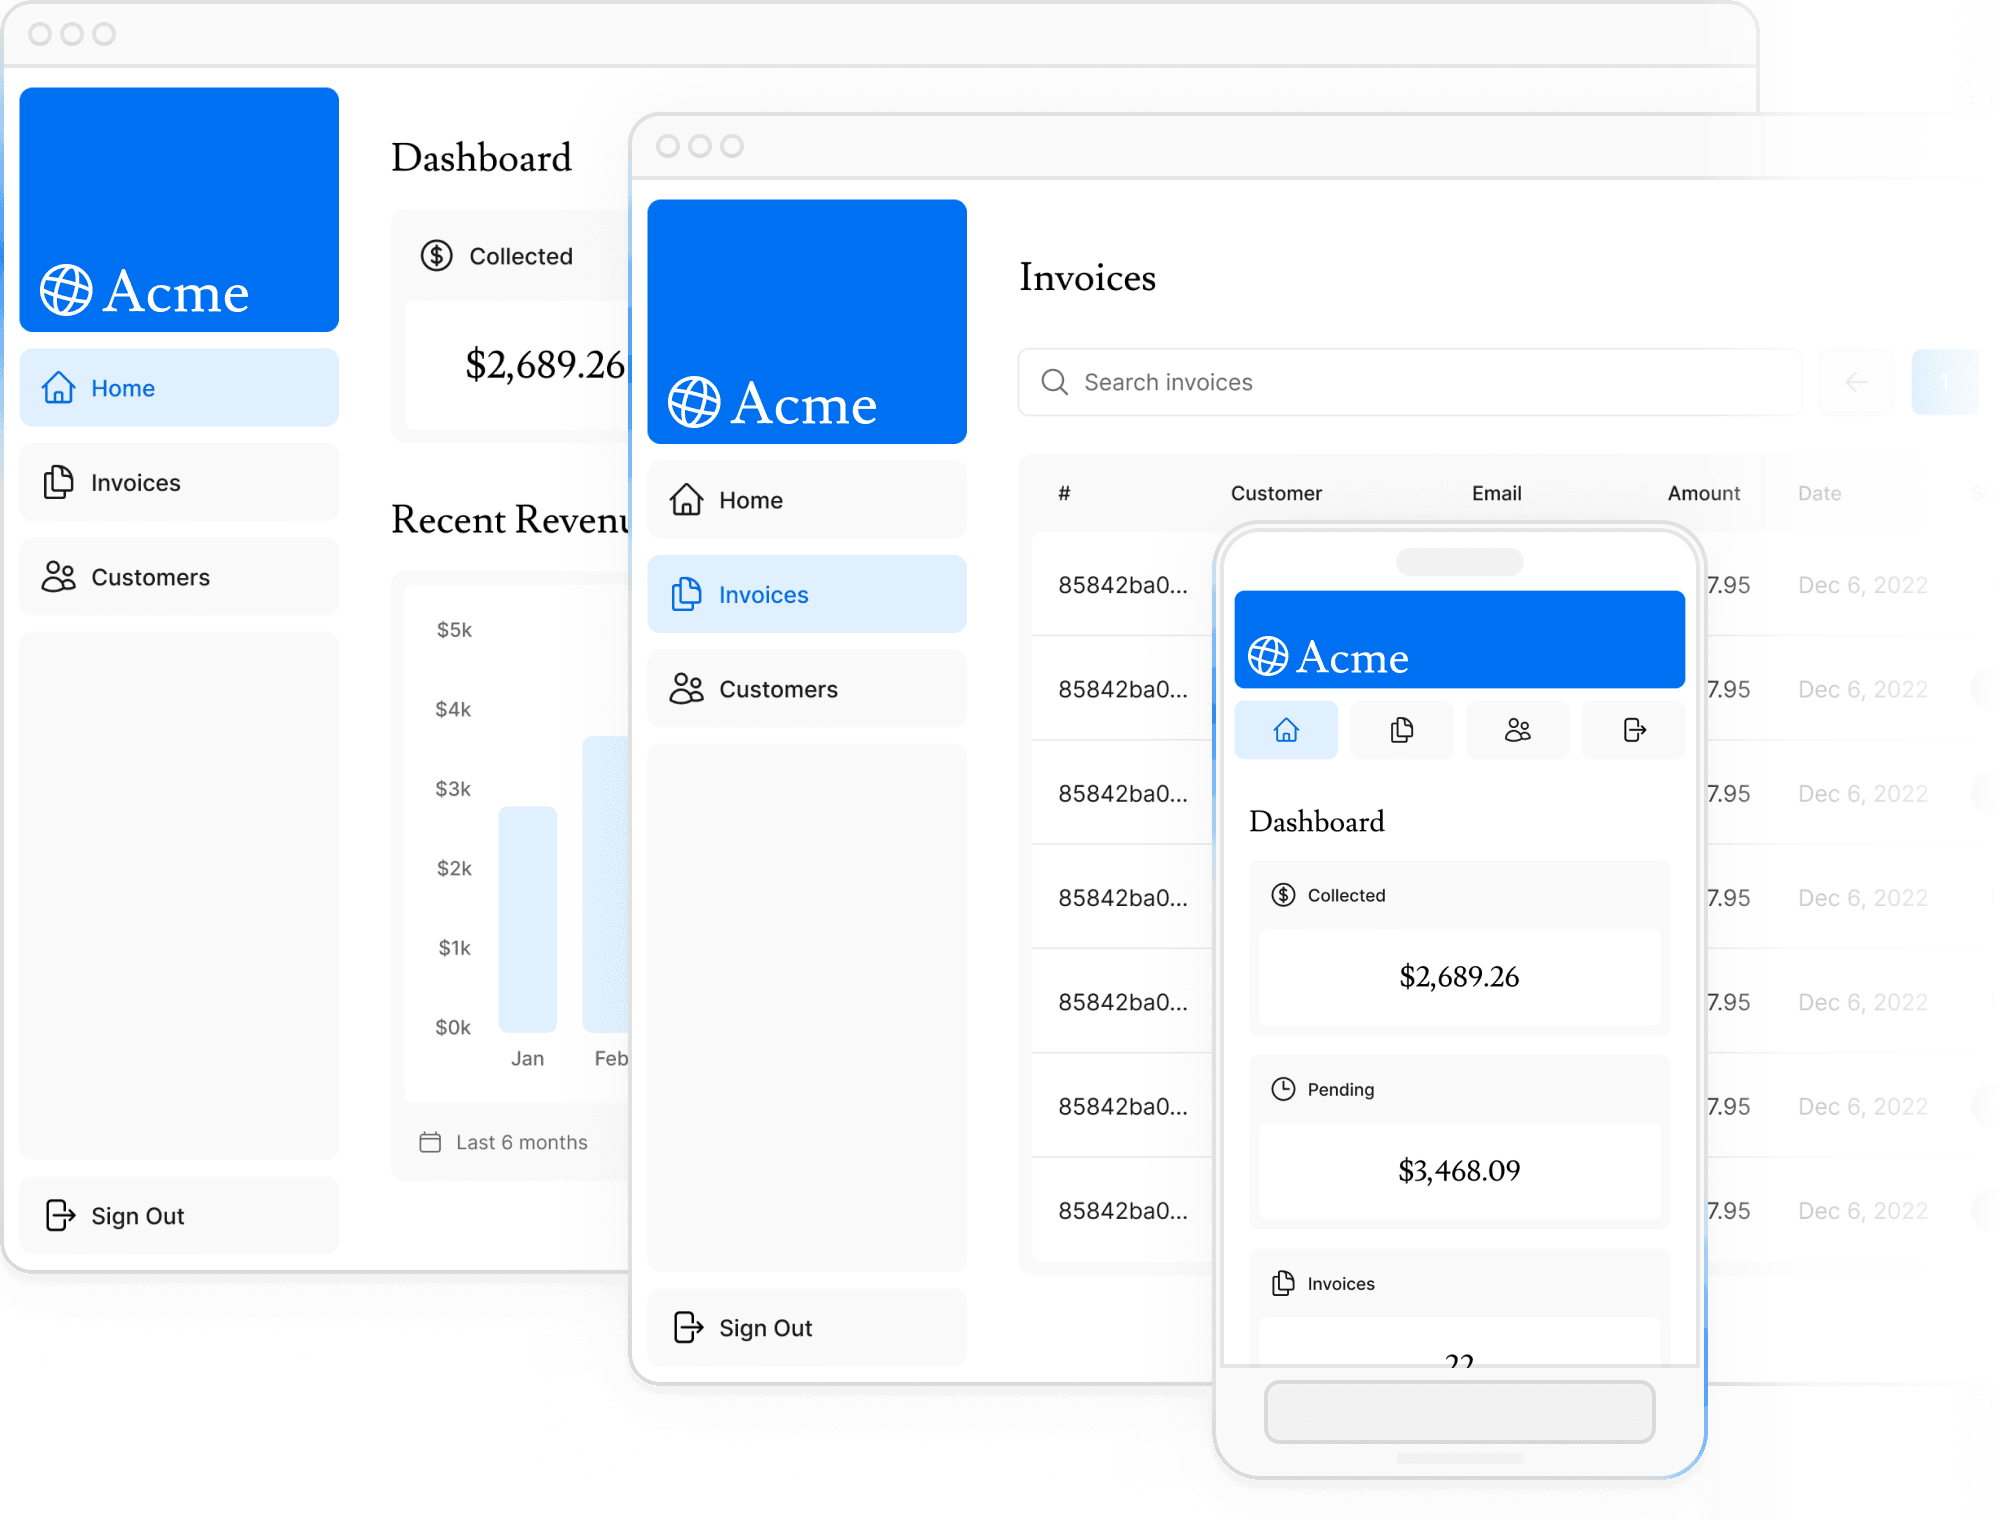 Screenshots of the dashboard project showing desktop and mobile versions